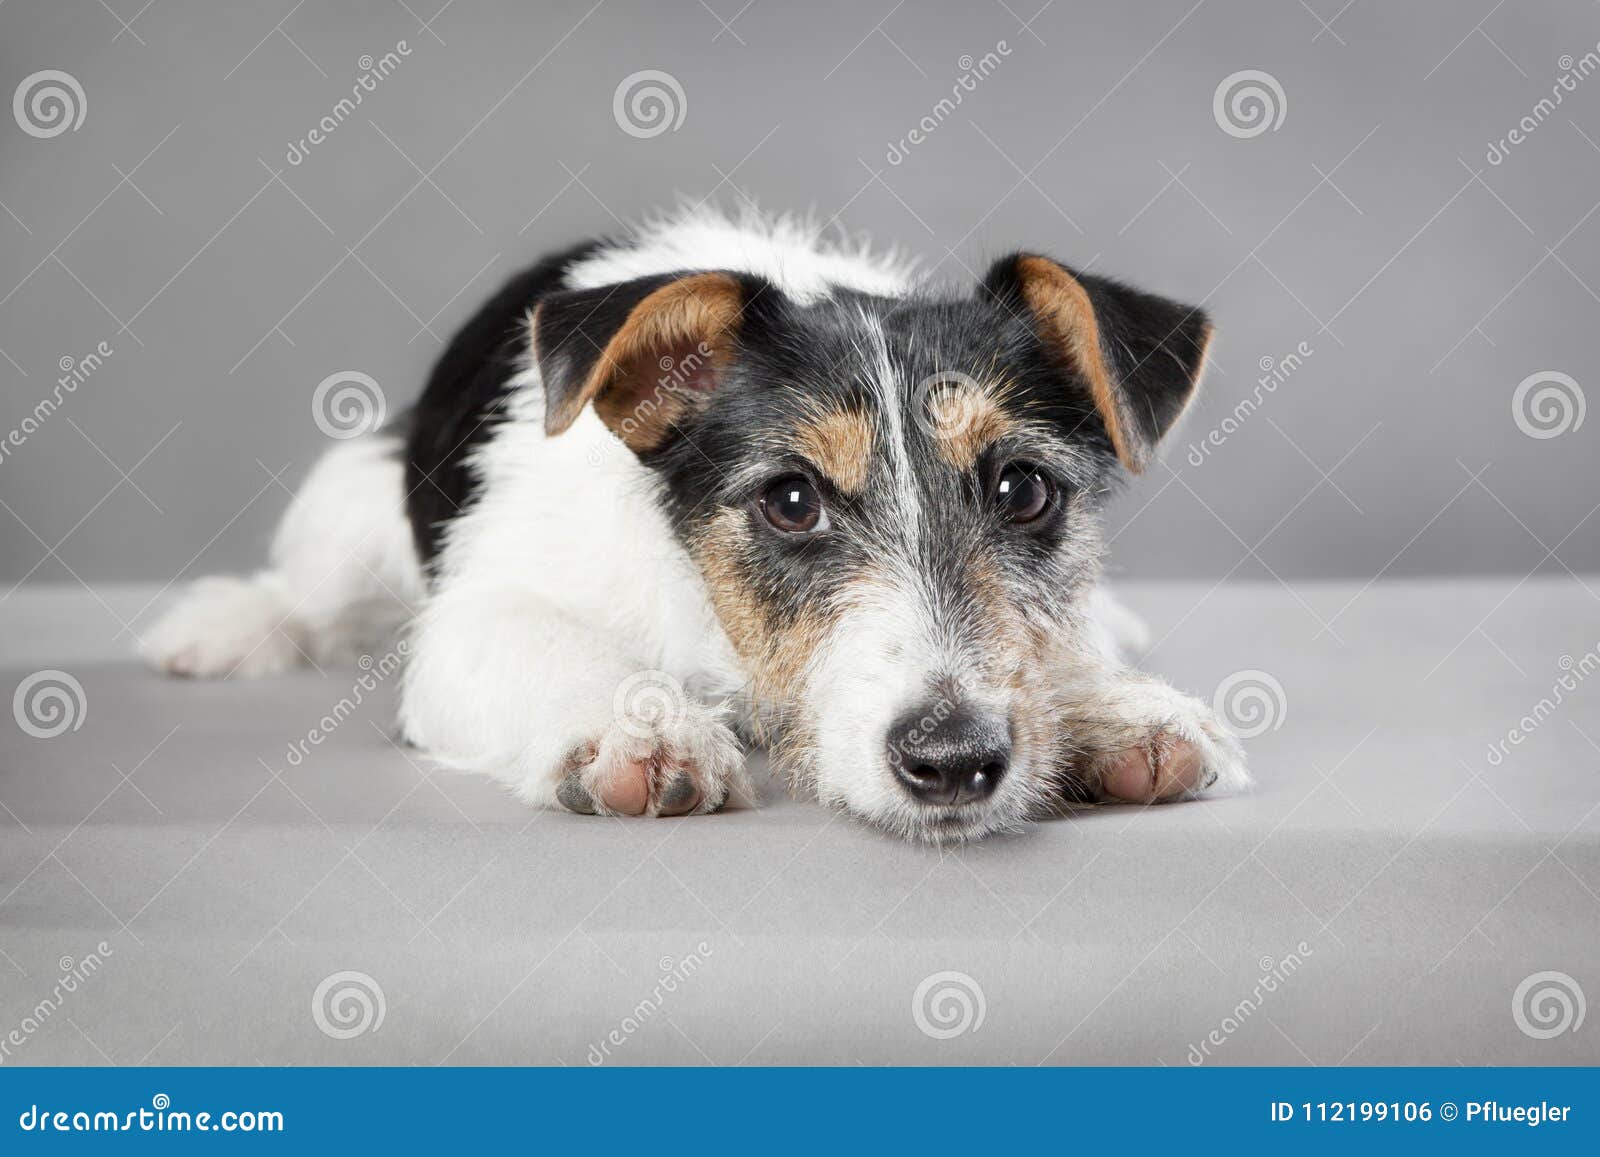 jack russell mix breeds